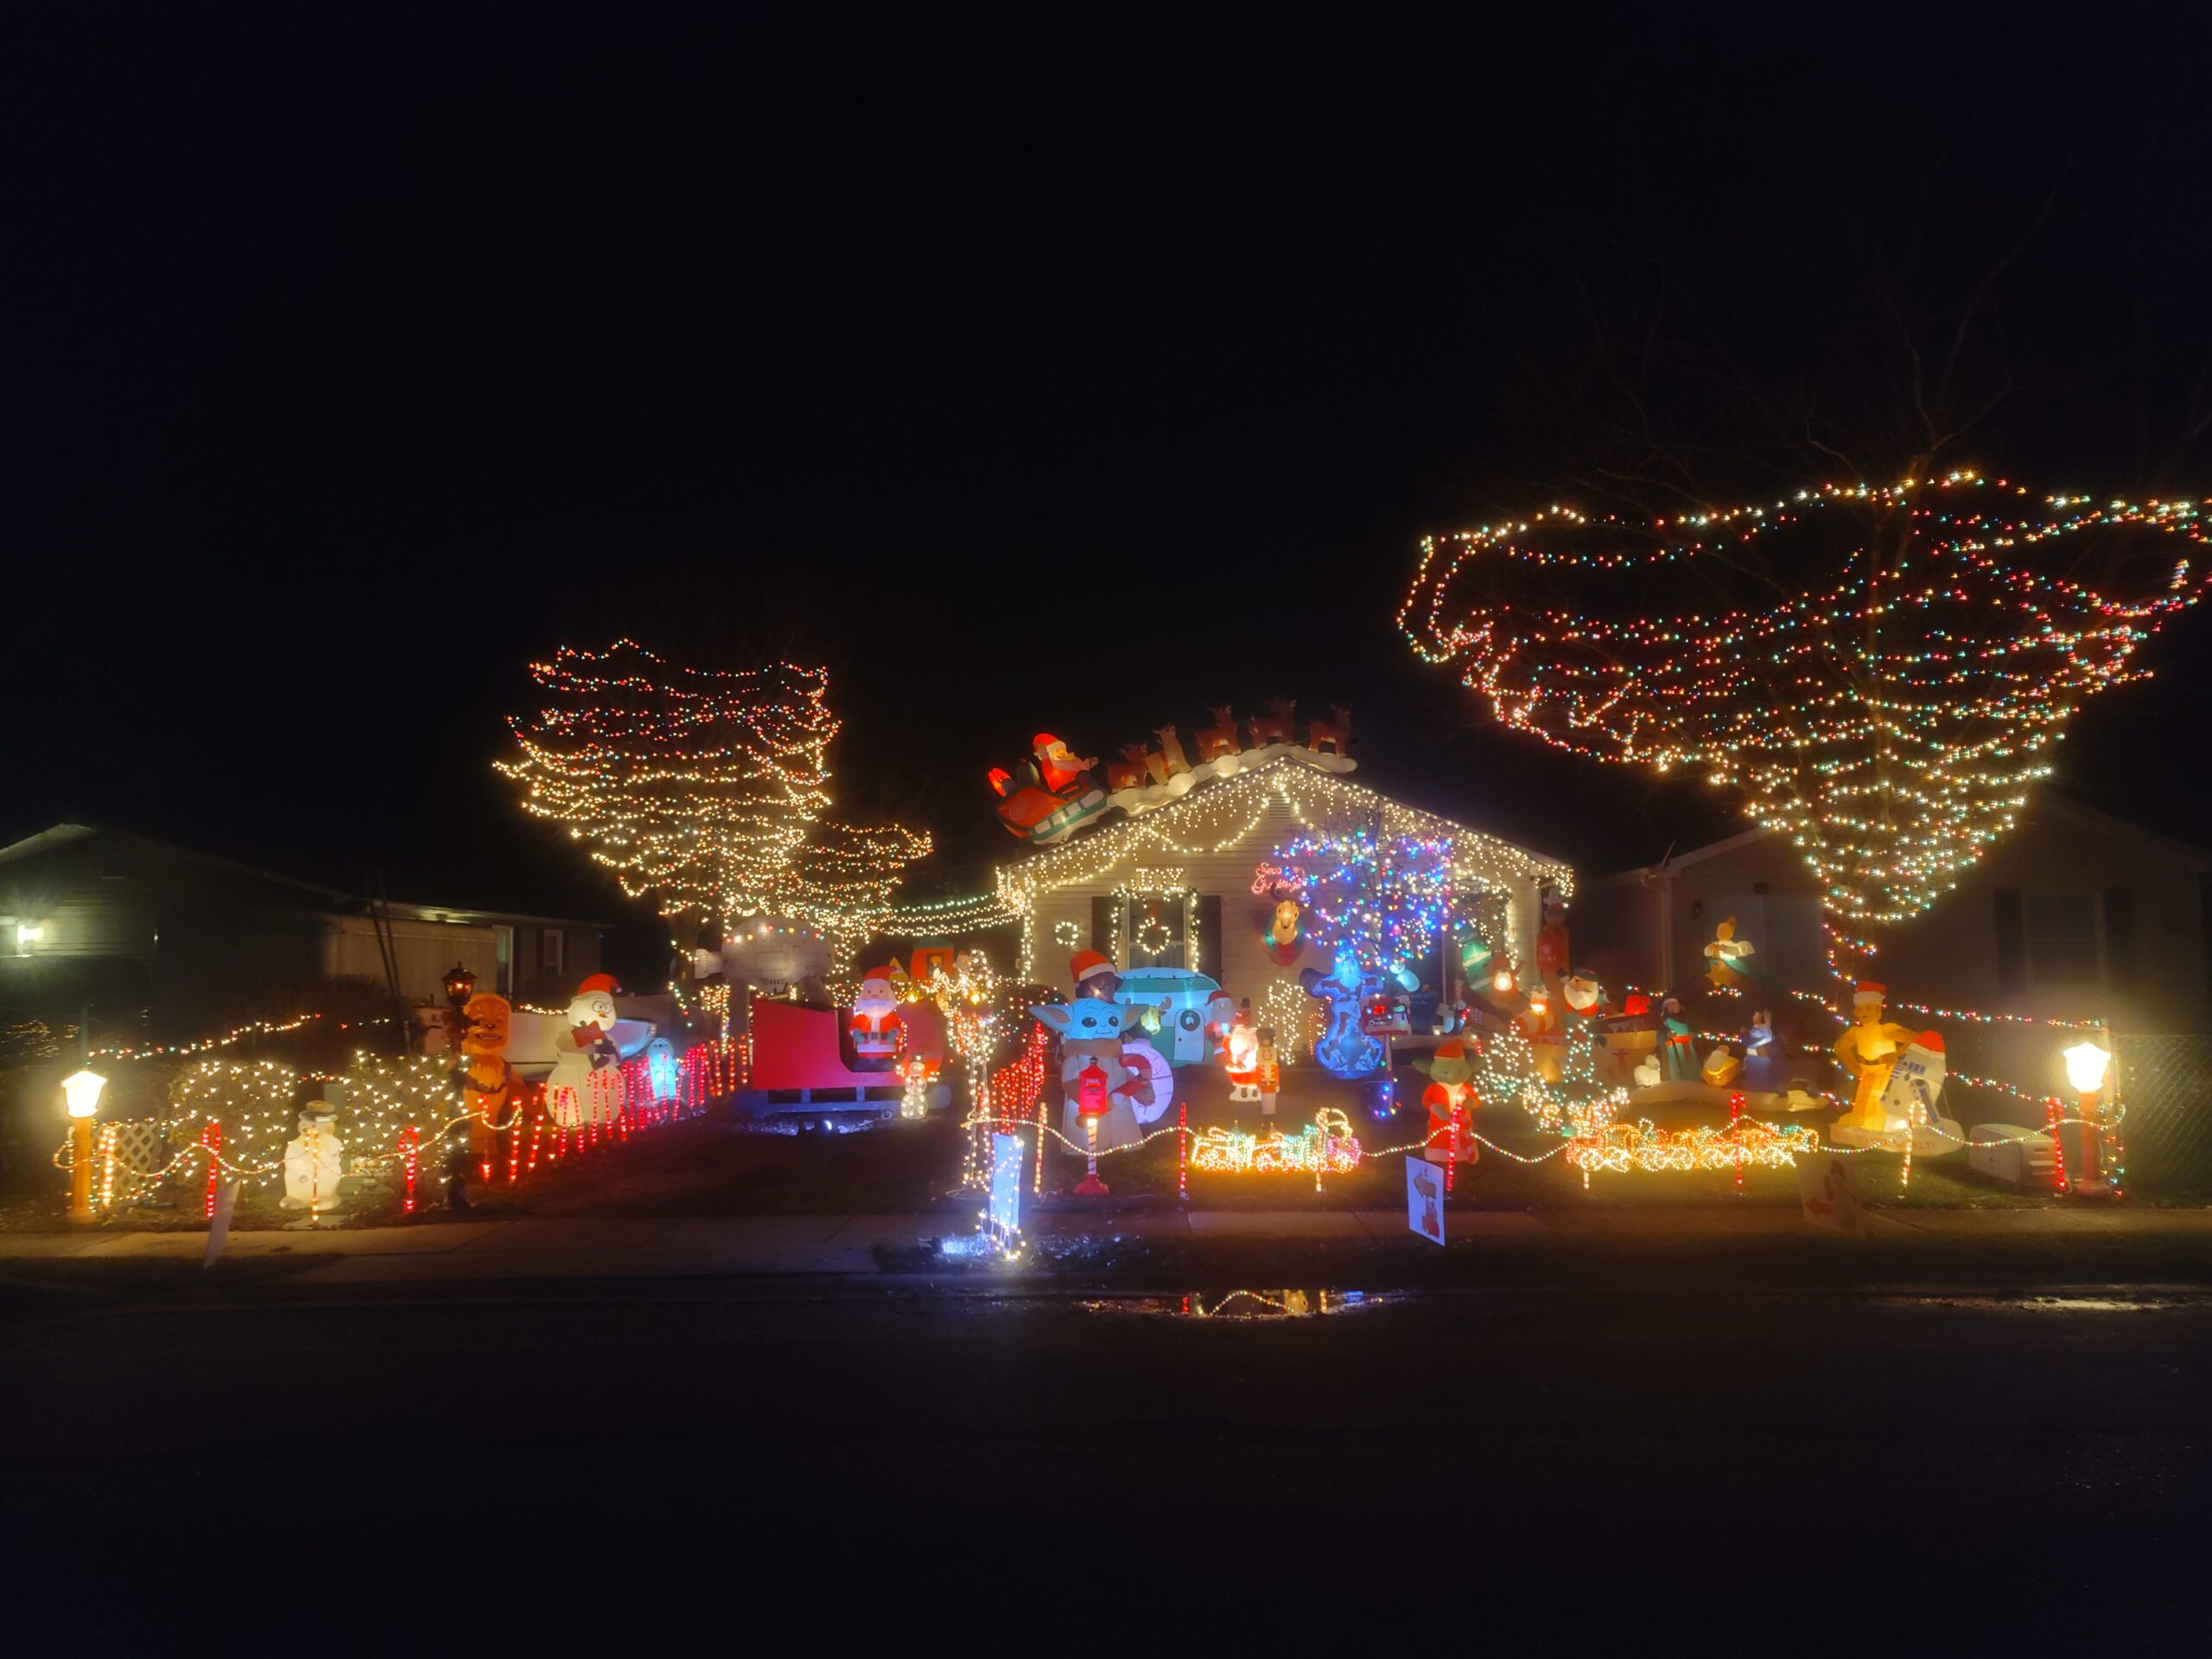 Sands Family Christmas Lights in Atco New Jersey